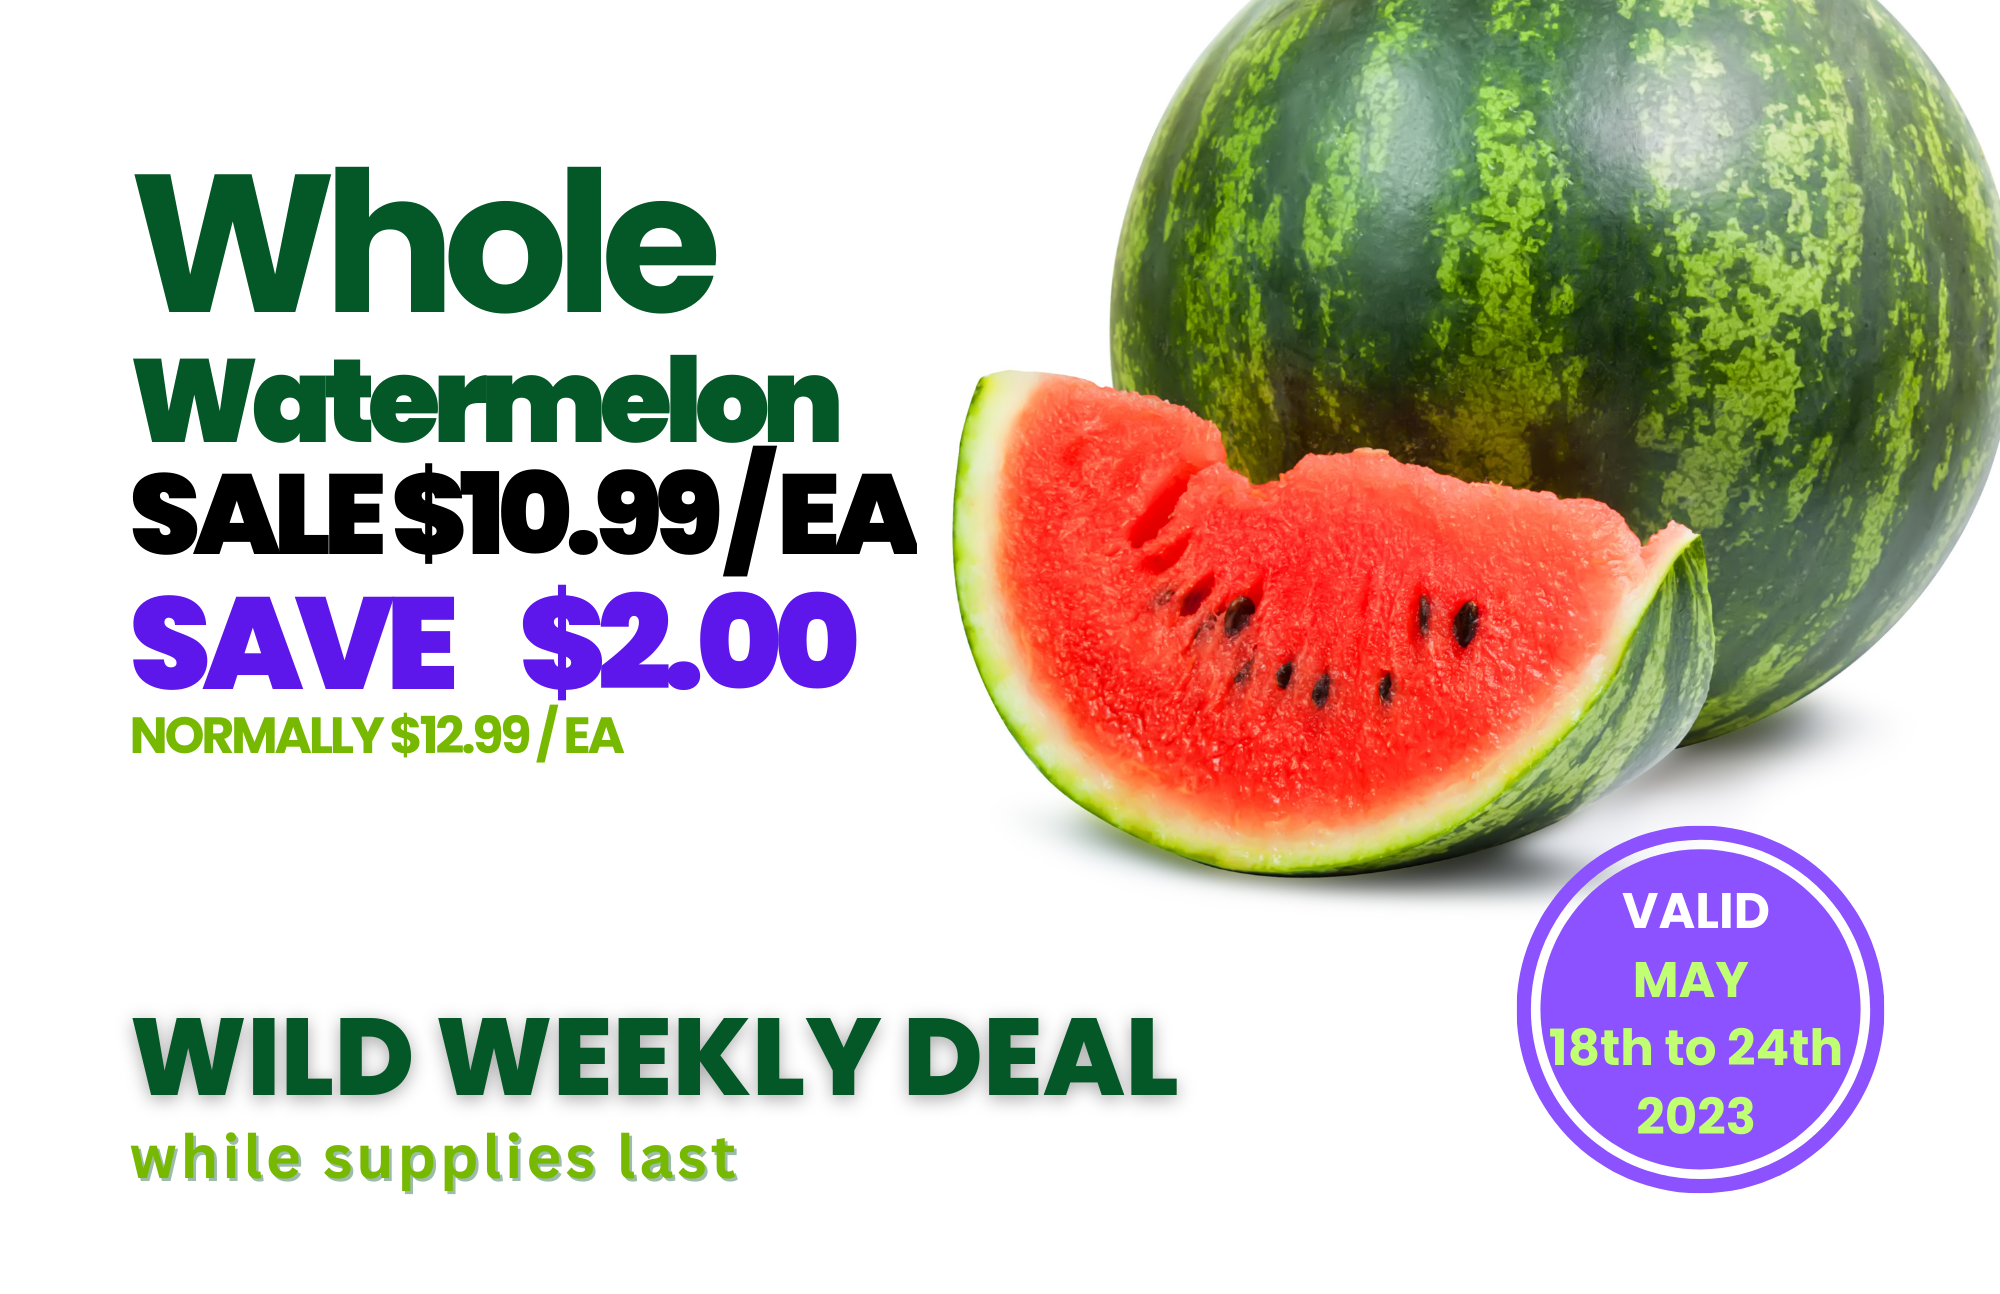 Wild Oats Market Williamstown MA Weekly Deals May 18-24 2023 Watermelon.png